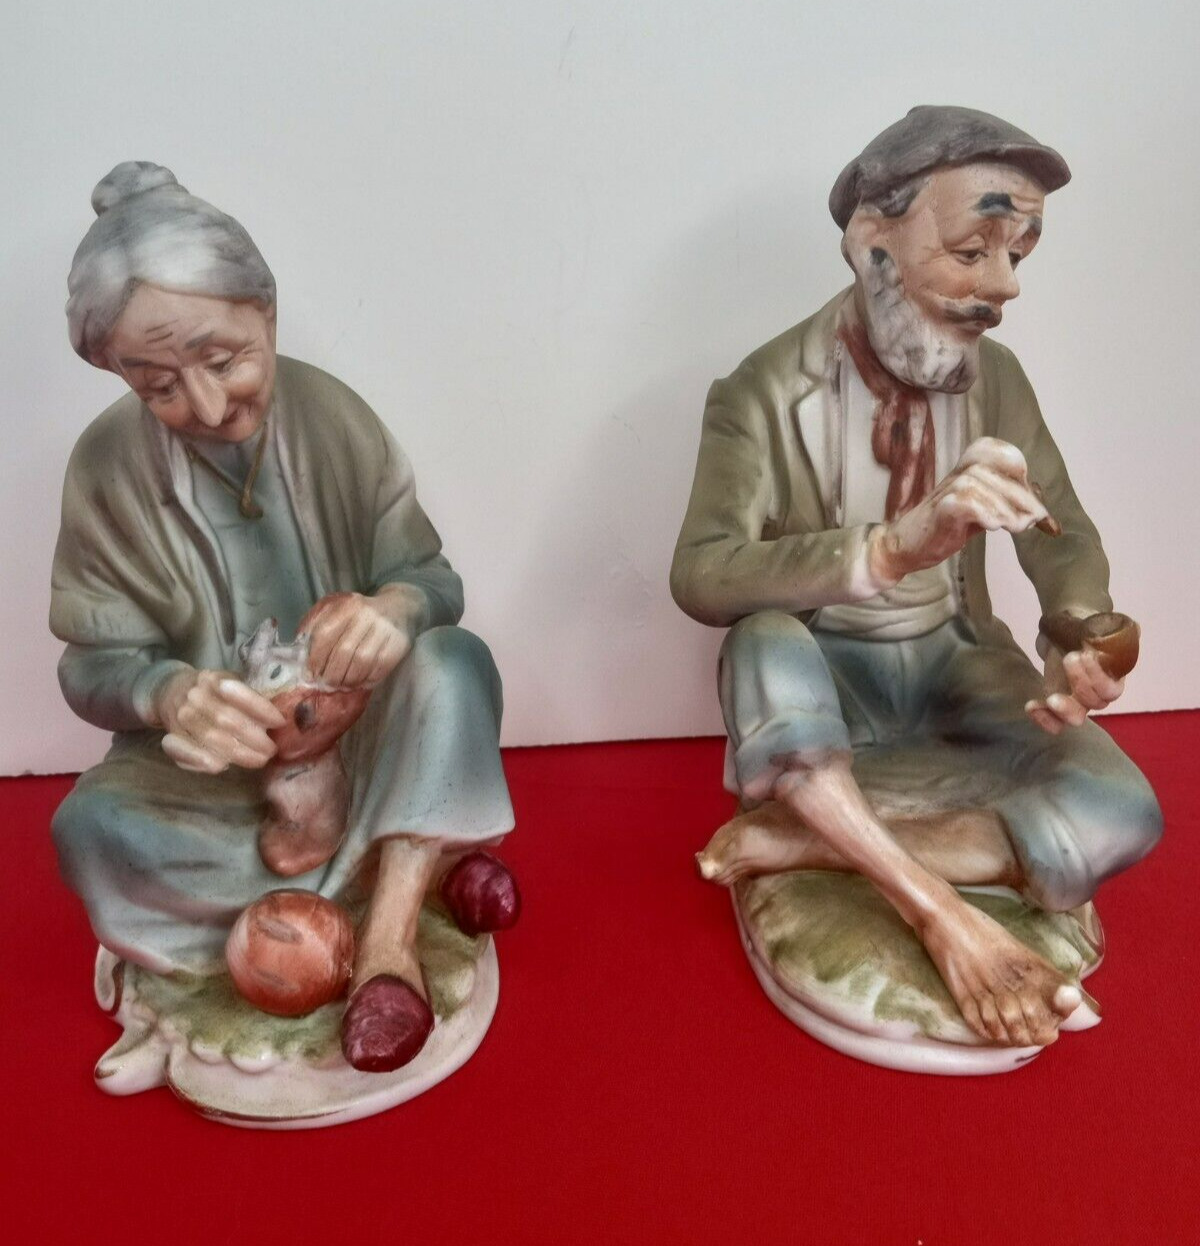 Artmark Figurines Man With Pipe and Woman Knitting Vintage Set of 2